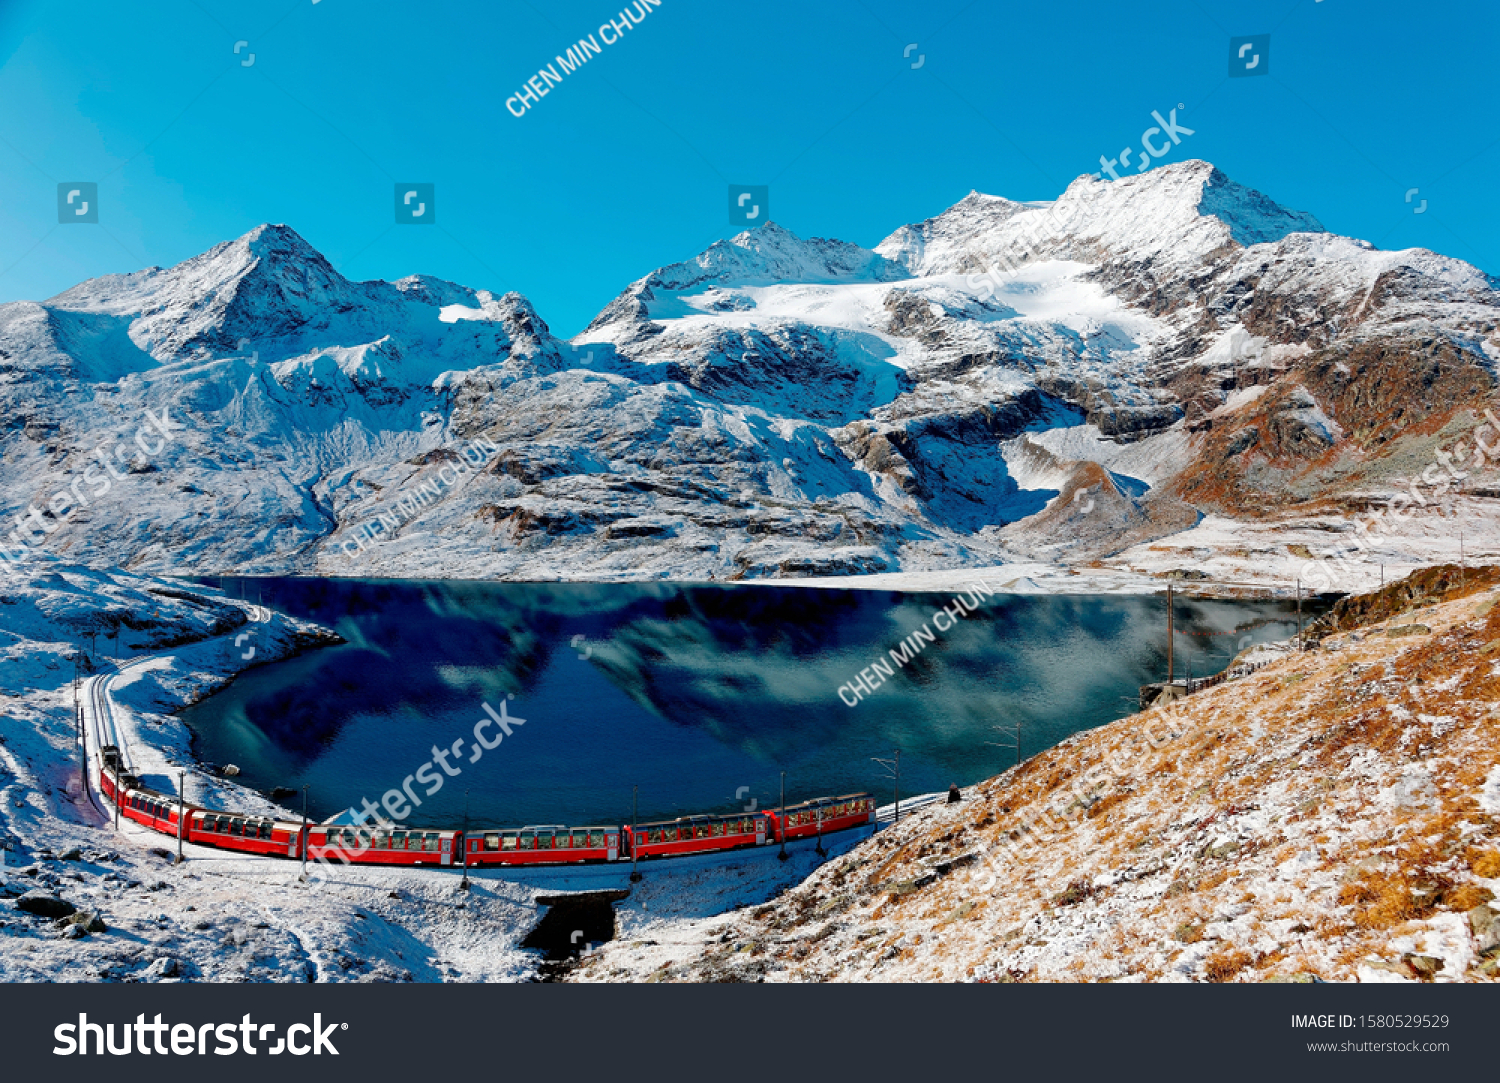 A Bernina Express train traveling along the lake shore of Lago Bianco and Piz Cambrena towering under blue sky in background after a snowfall in autumn, near Ospizio Bernina, in Grisons, Switzerland #1580529529